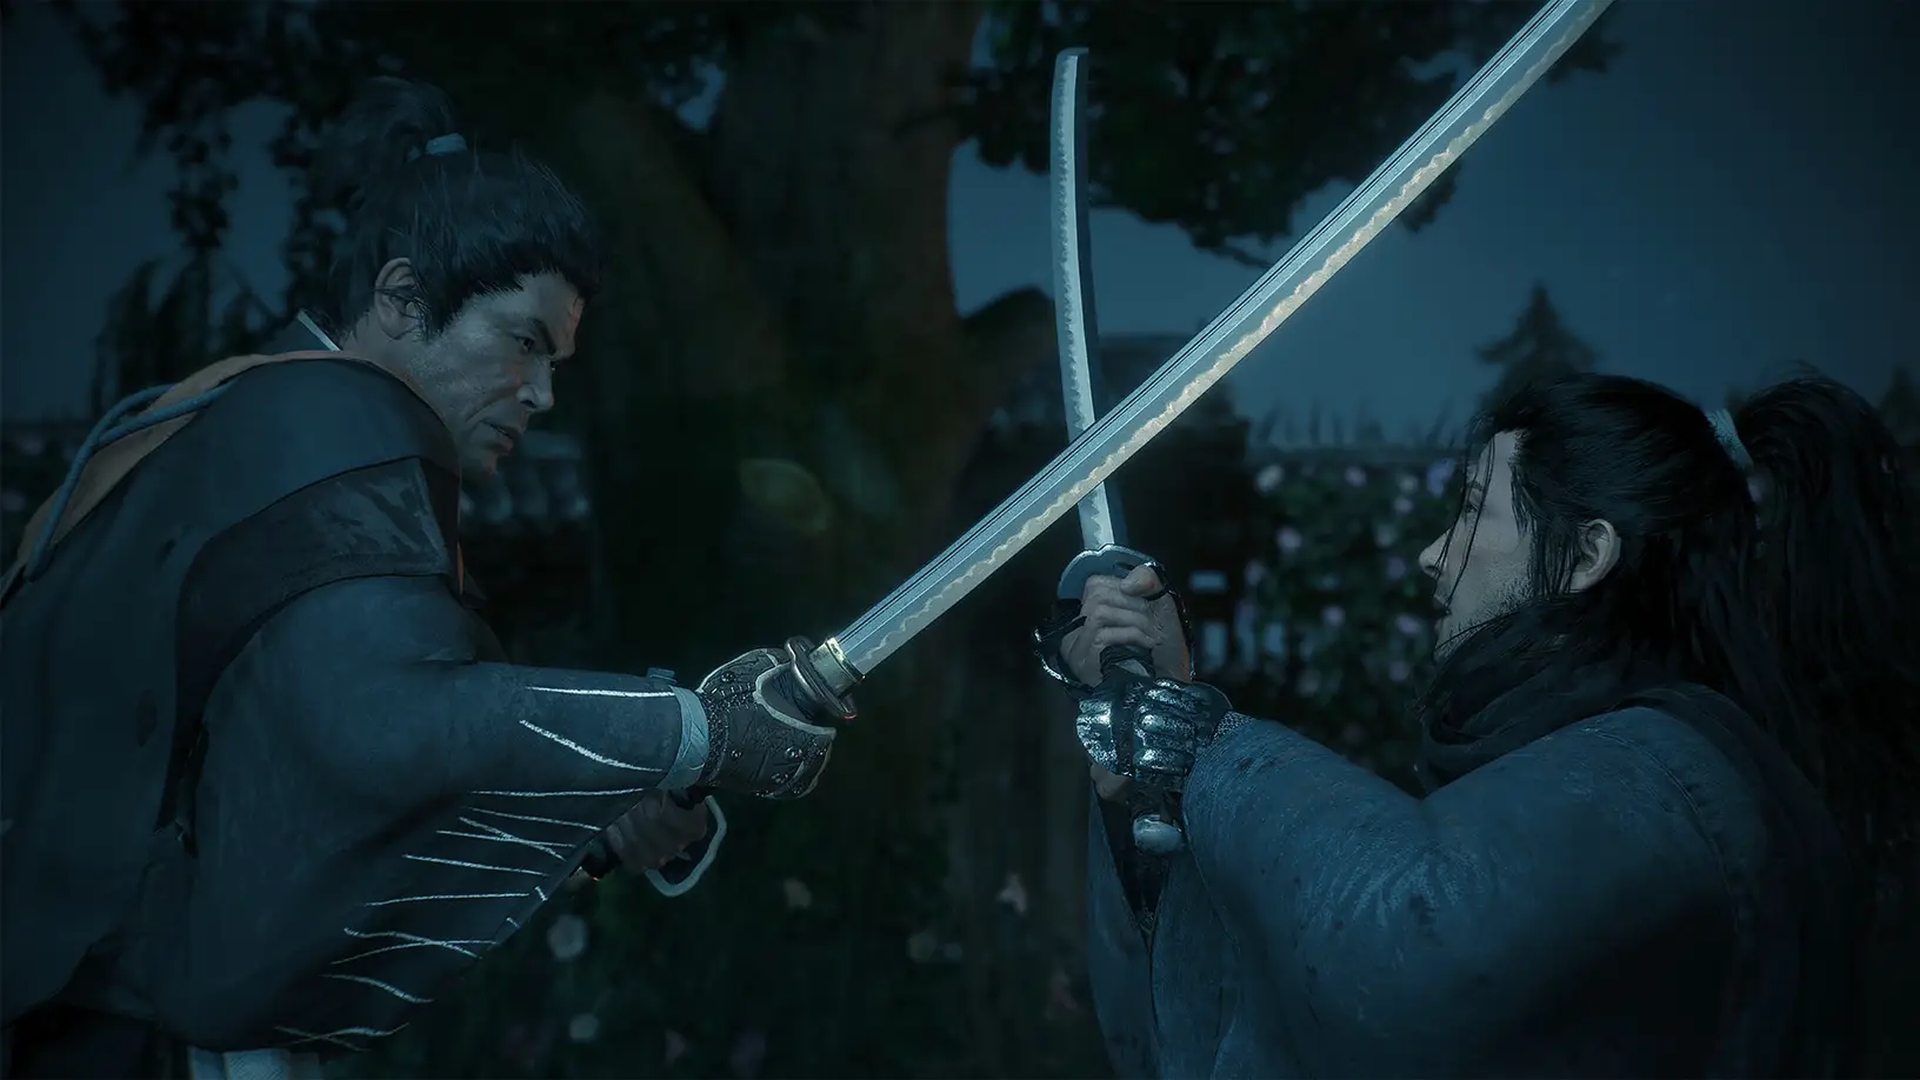 Team Ninja released a behind-the-scenes video showing the combat component of Rise of the Ronin